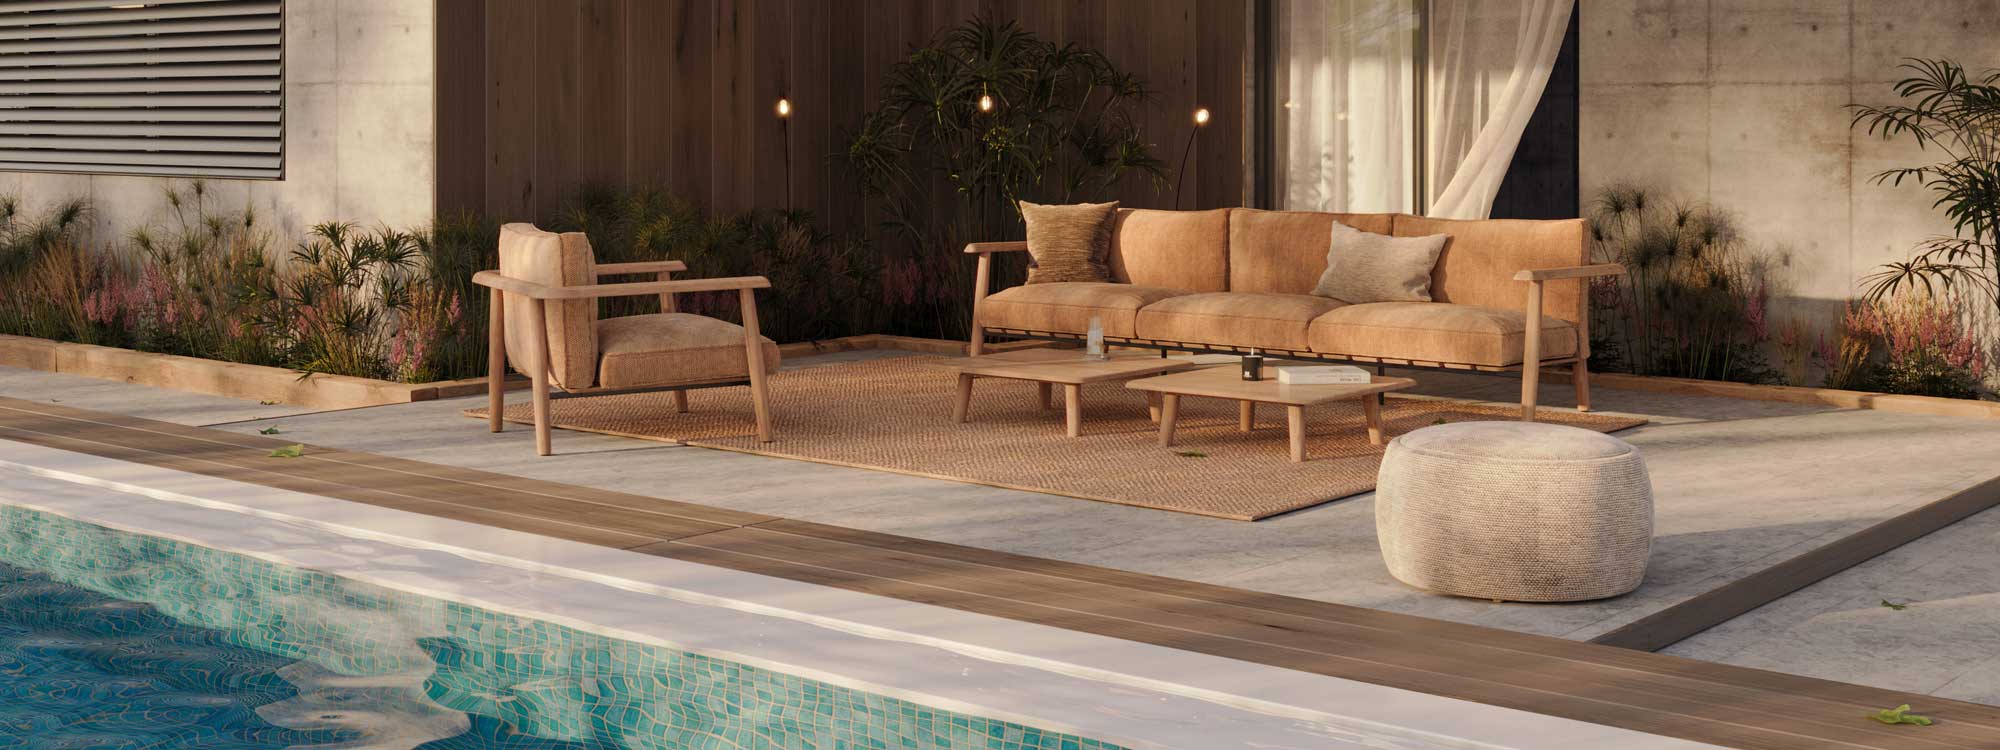 Image of Royal Botania Mambo 3 seat teak garden sofa and lounge chair with plump brown cushions on minimalist poolside